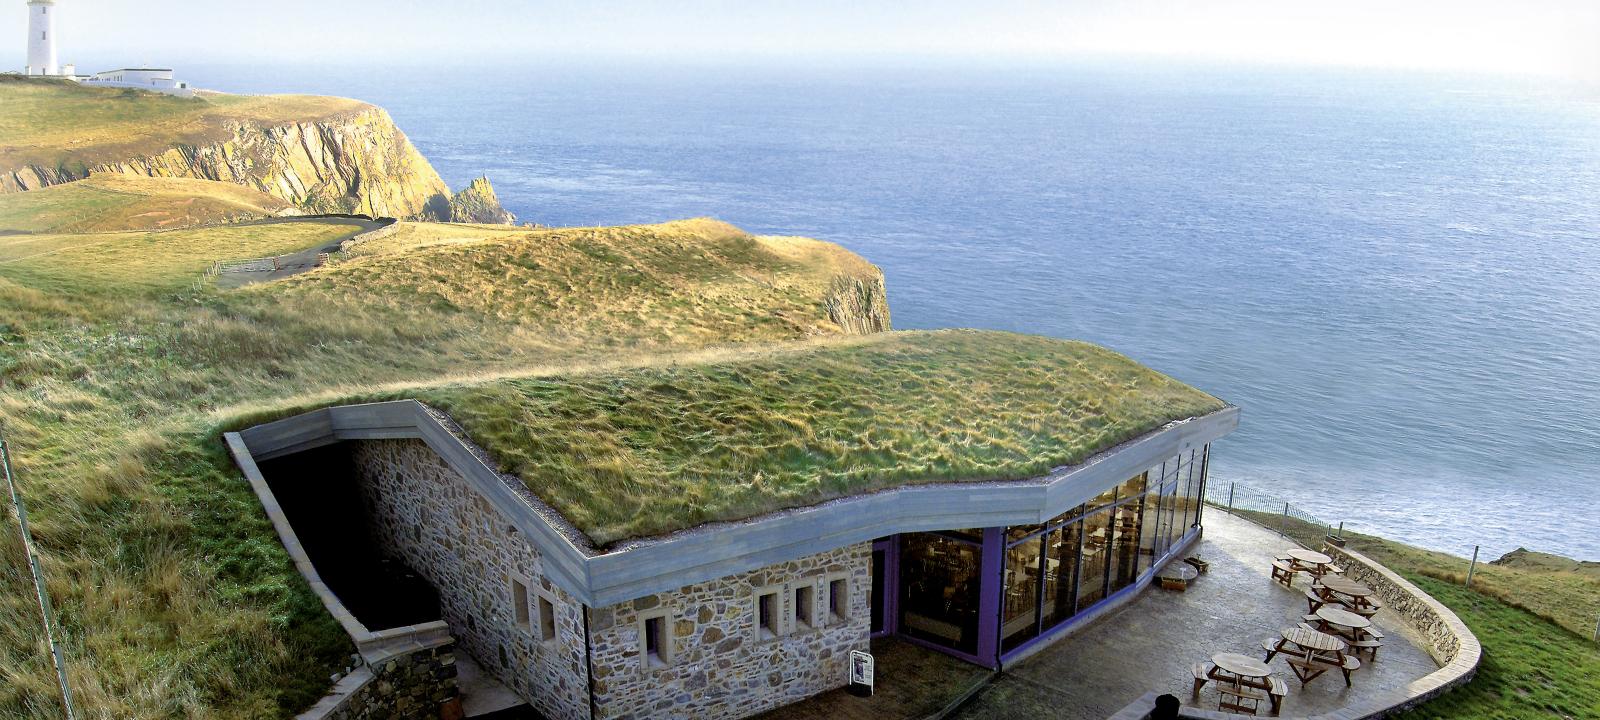 Grass roof by the ocean